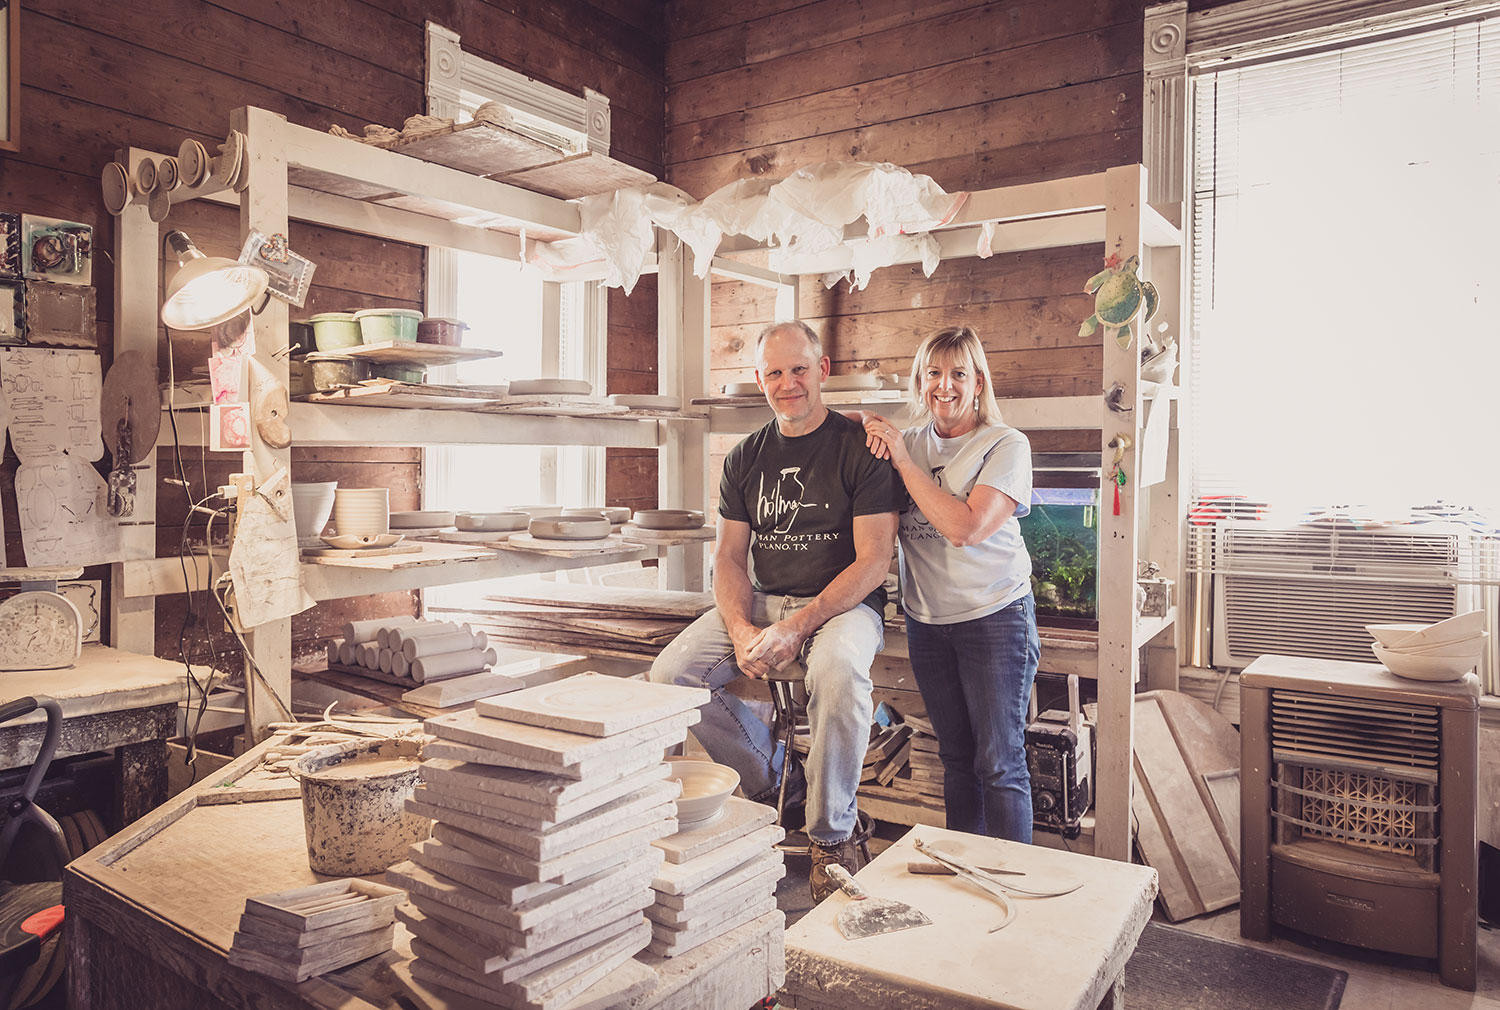 Tony and Debbie Holman, current owners of Lydia Schimepfenig's house 